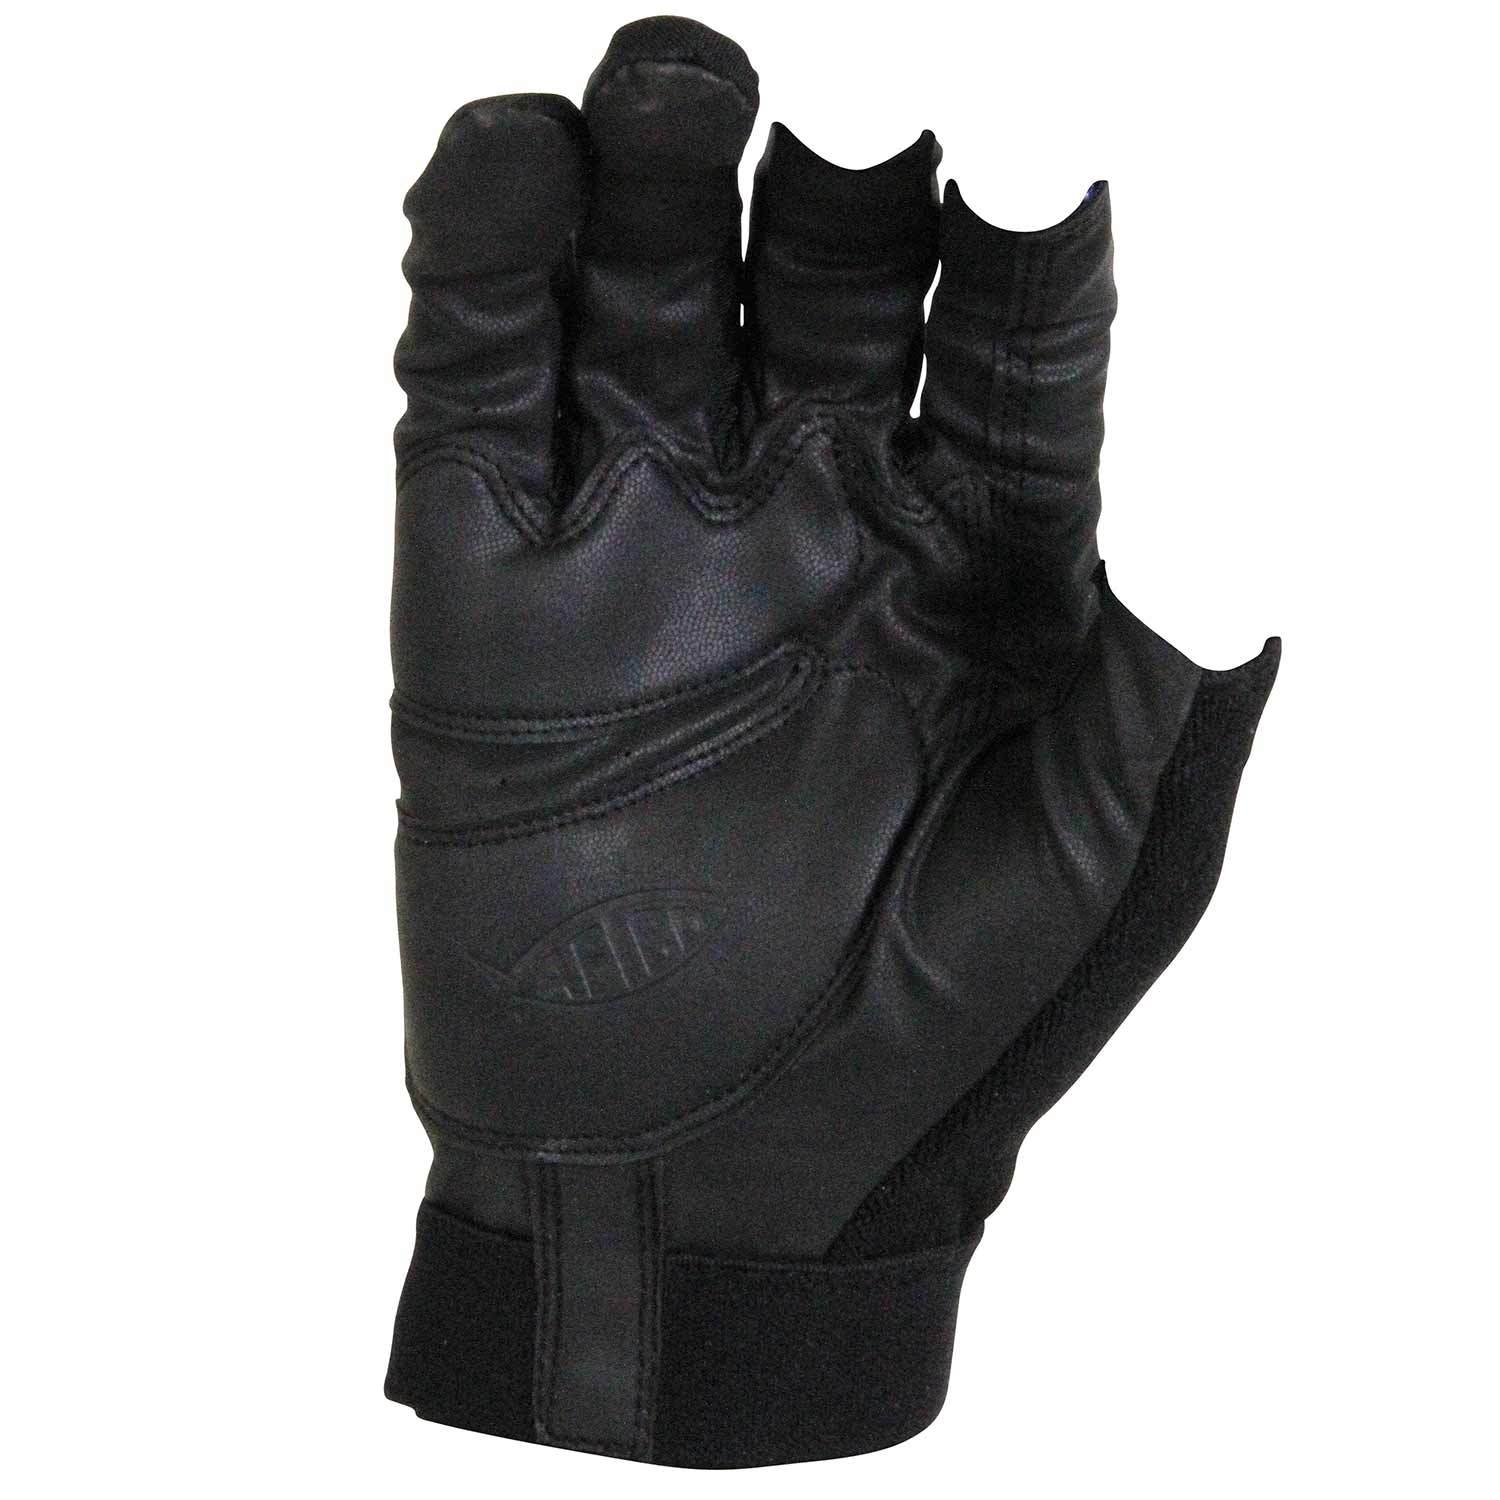 Pick Size Free Shipping AFTCO Solmar Short UV Sun Protection Fishing Glove 